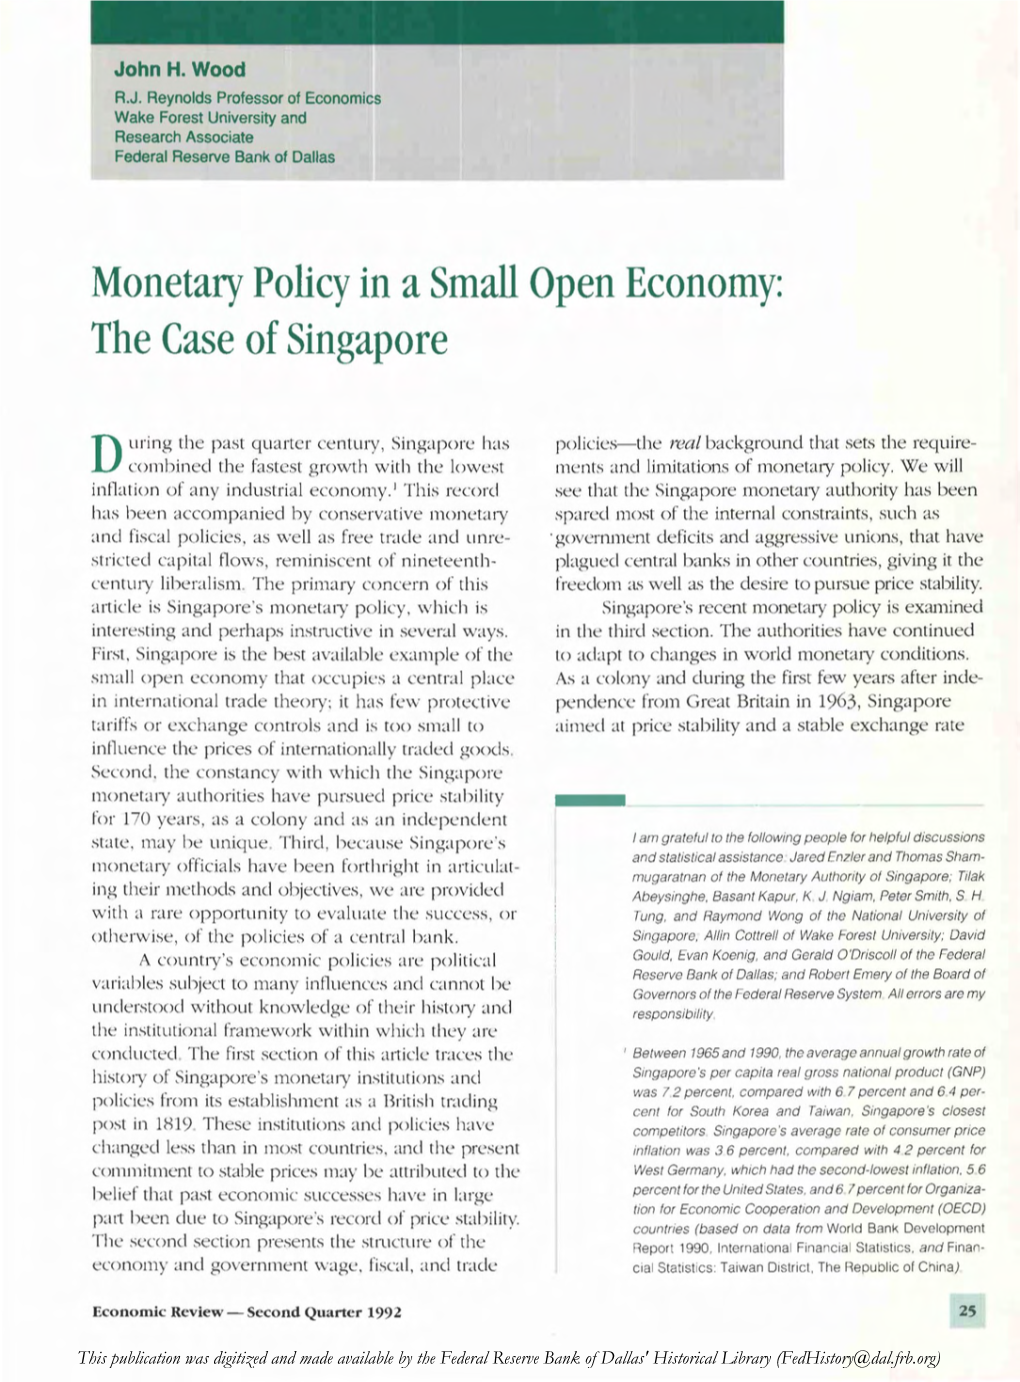 Monetary Policy in a Small Open Economy: the Case of Singapore